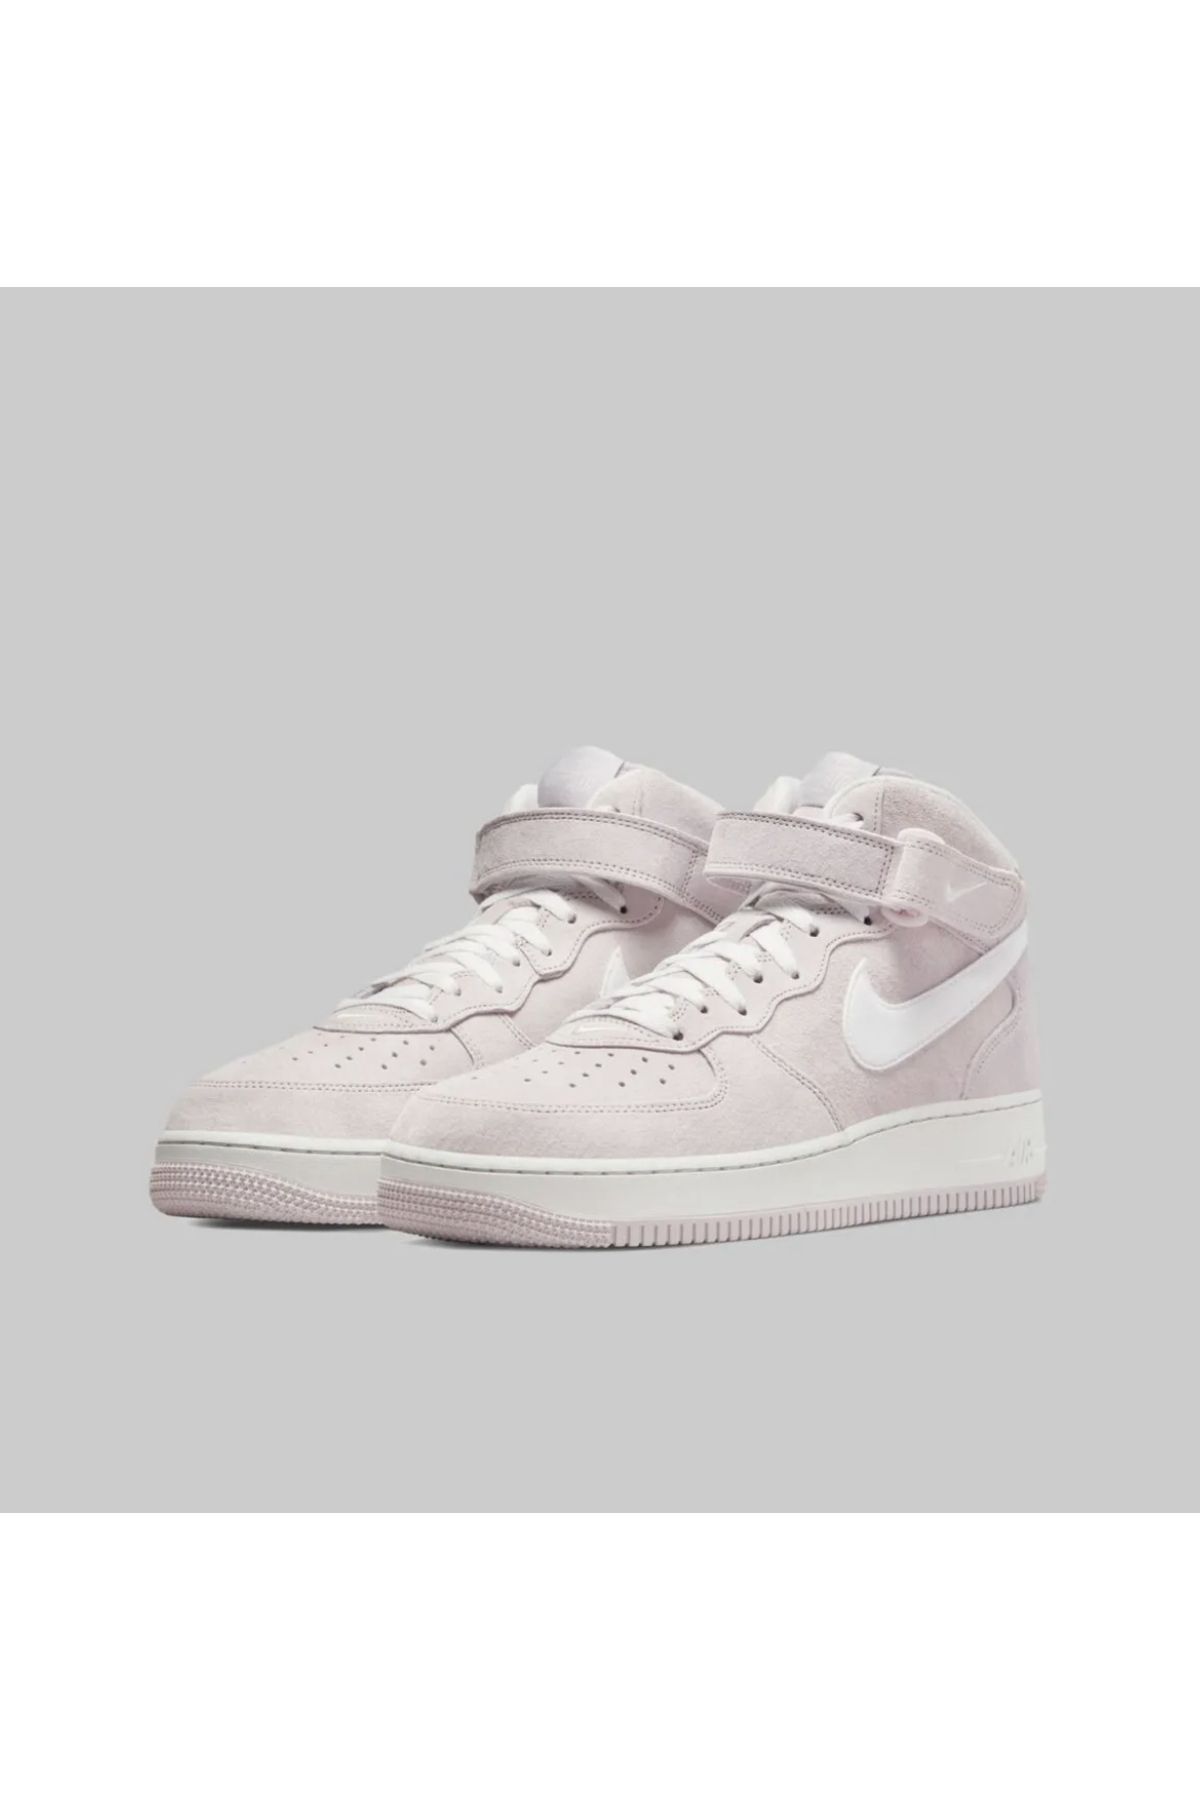 Nike Air Force 1 Mid "Venice" Leather Sneaker